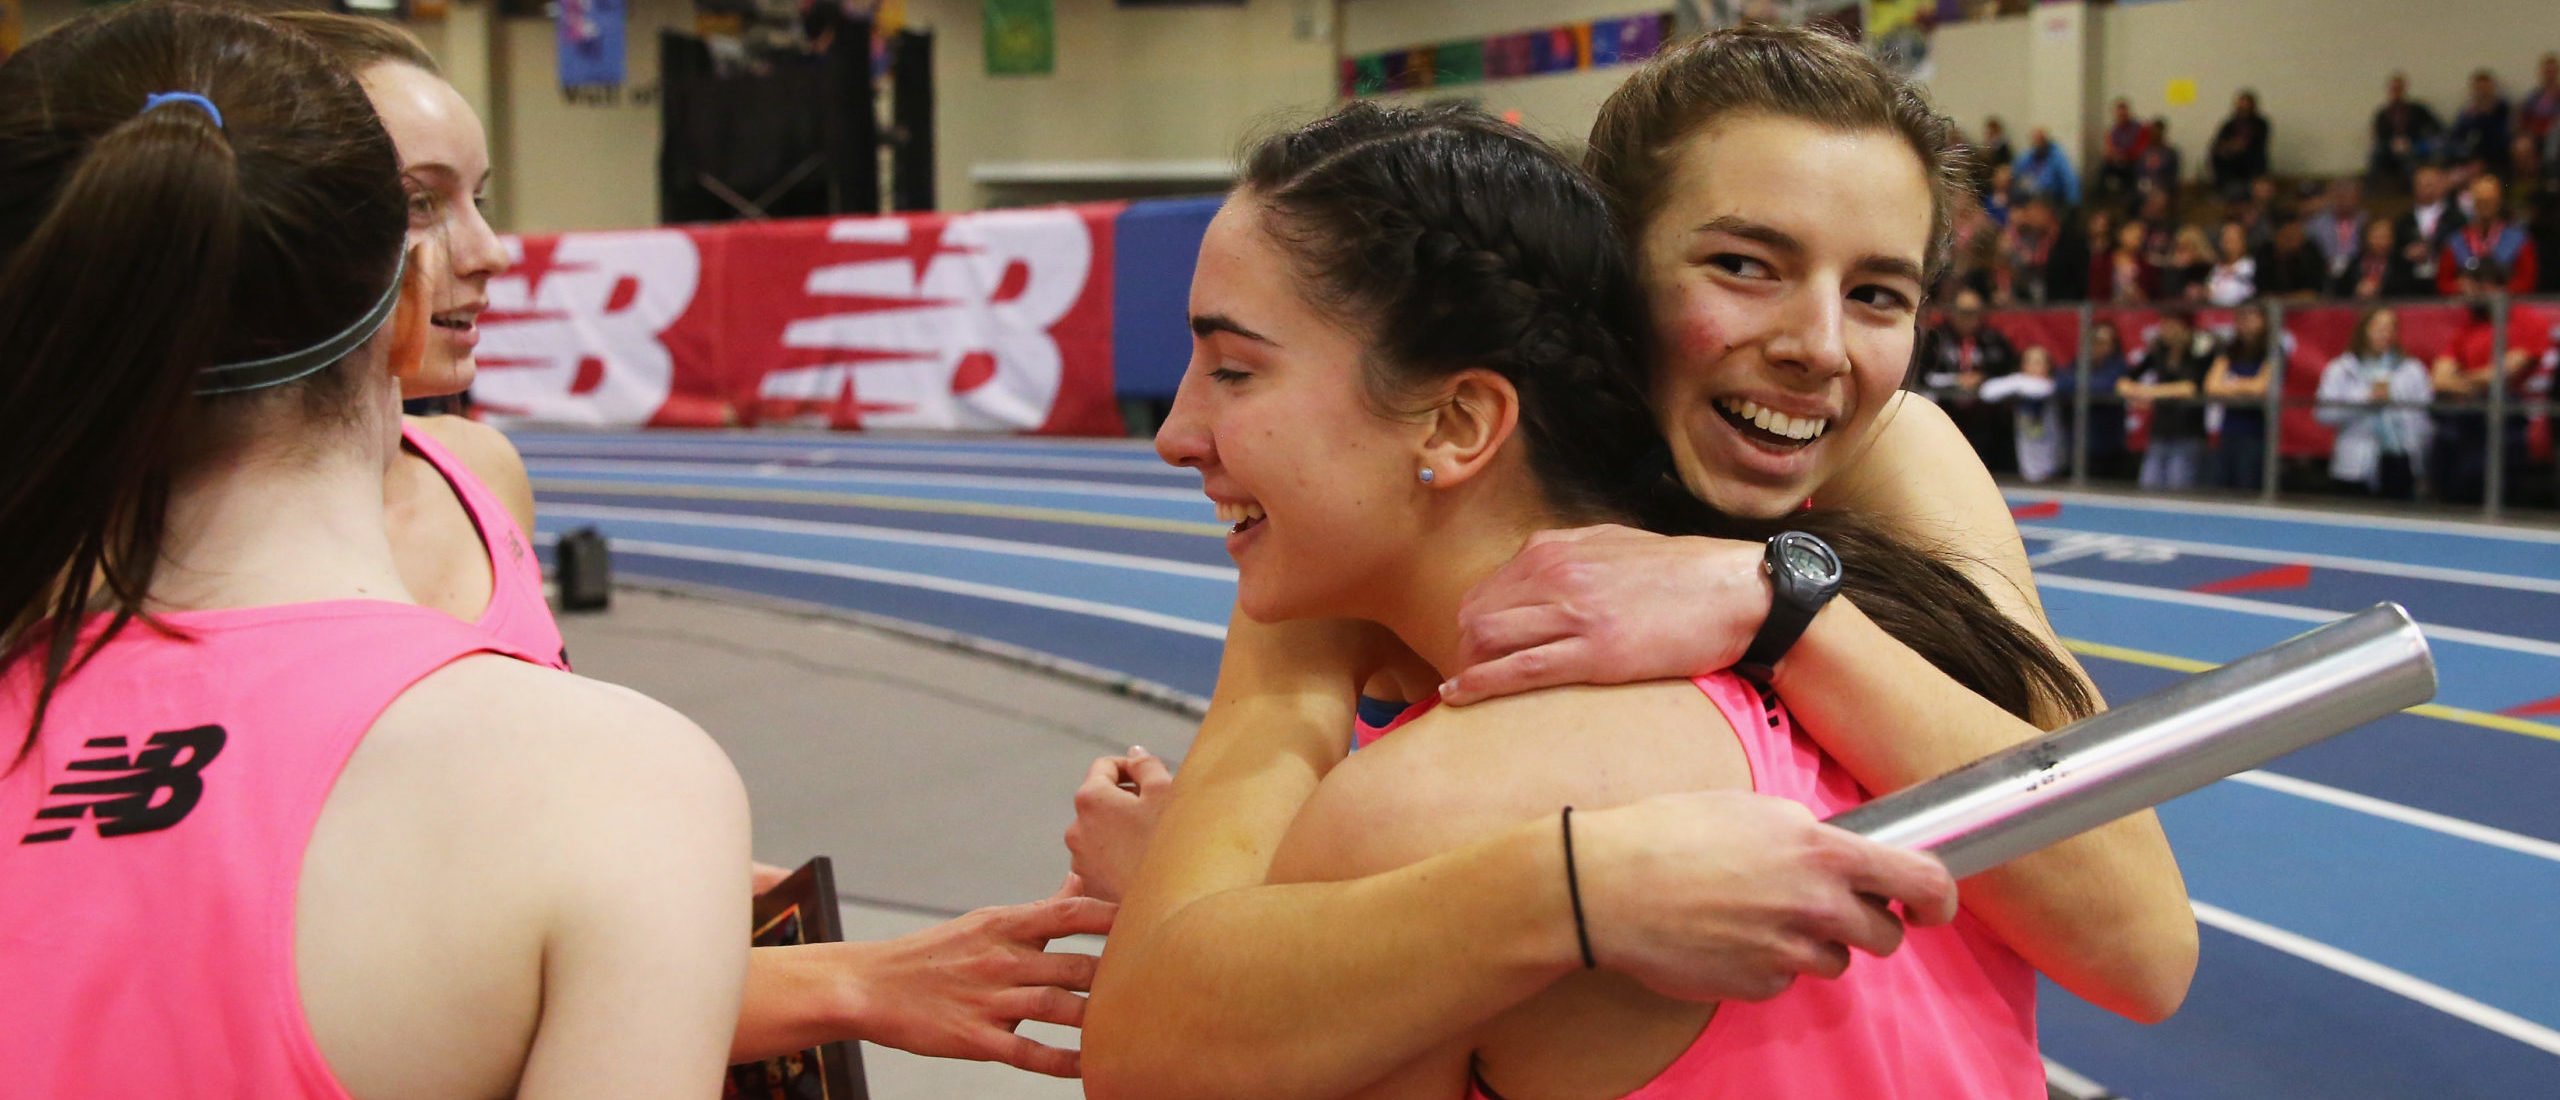 Members of the Concord-Carlisle high school team celebrate after winning the Girls' Sprint Medley Relay during the New Balance Indoor Grand Prix at Reggie Lewis Center on February 14, 2016 in Boston, Massachusetts. (Photo by Maddie Meyer/Getty Images)